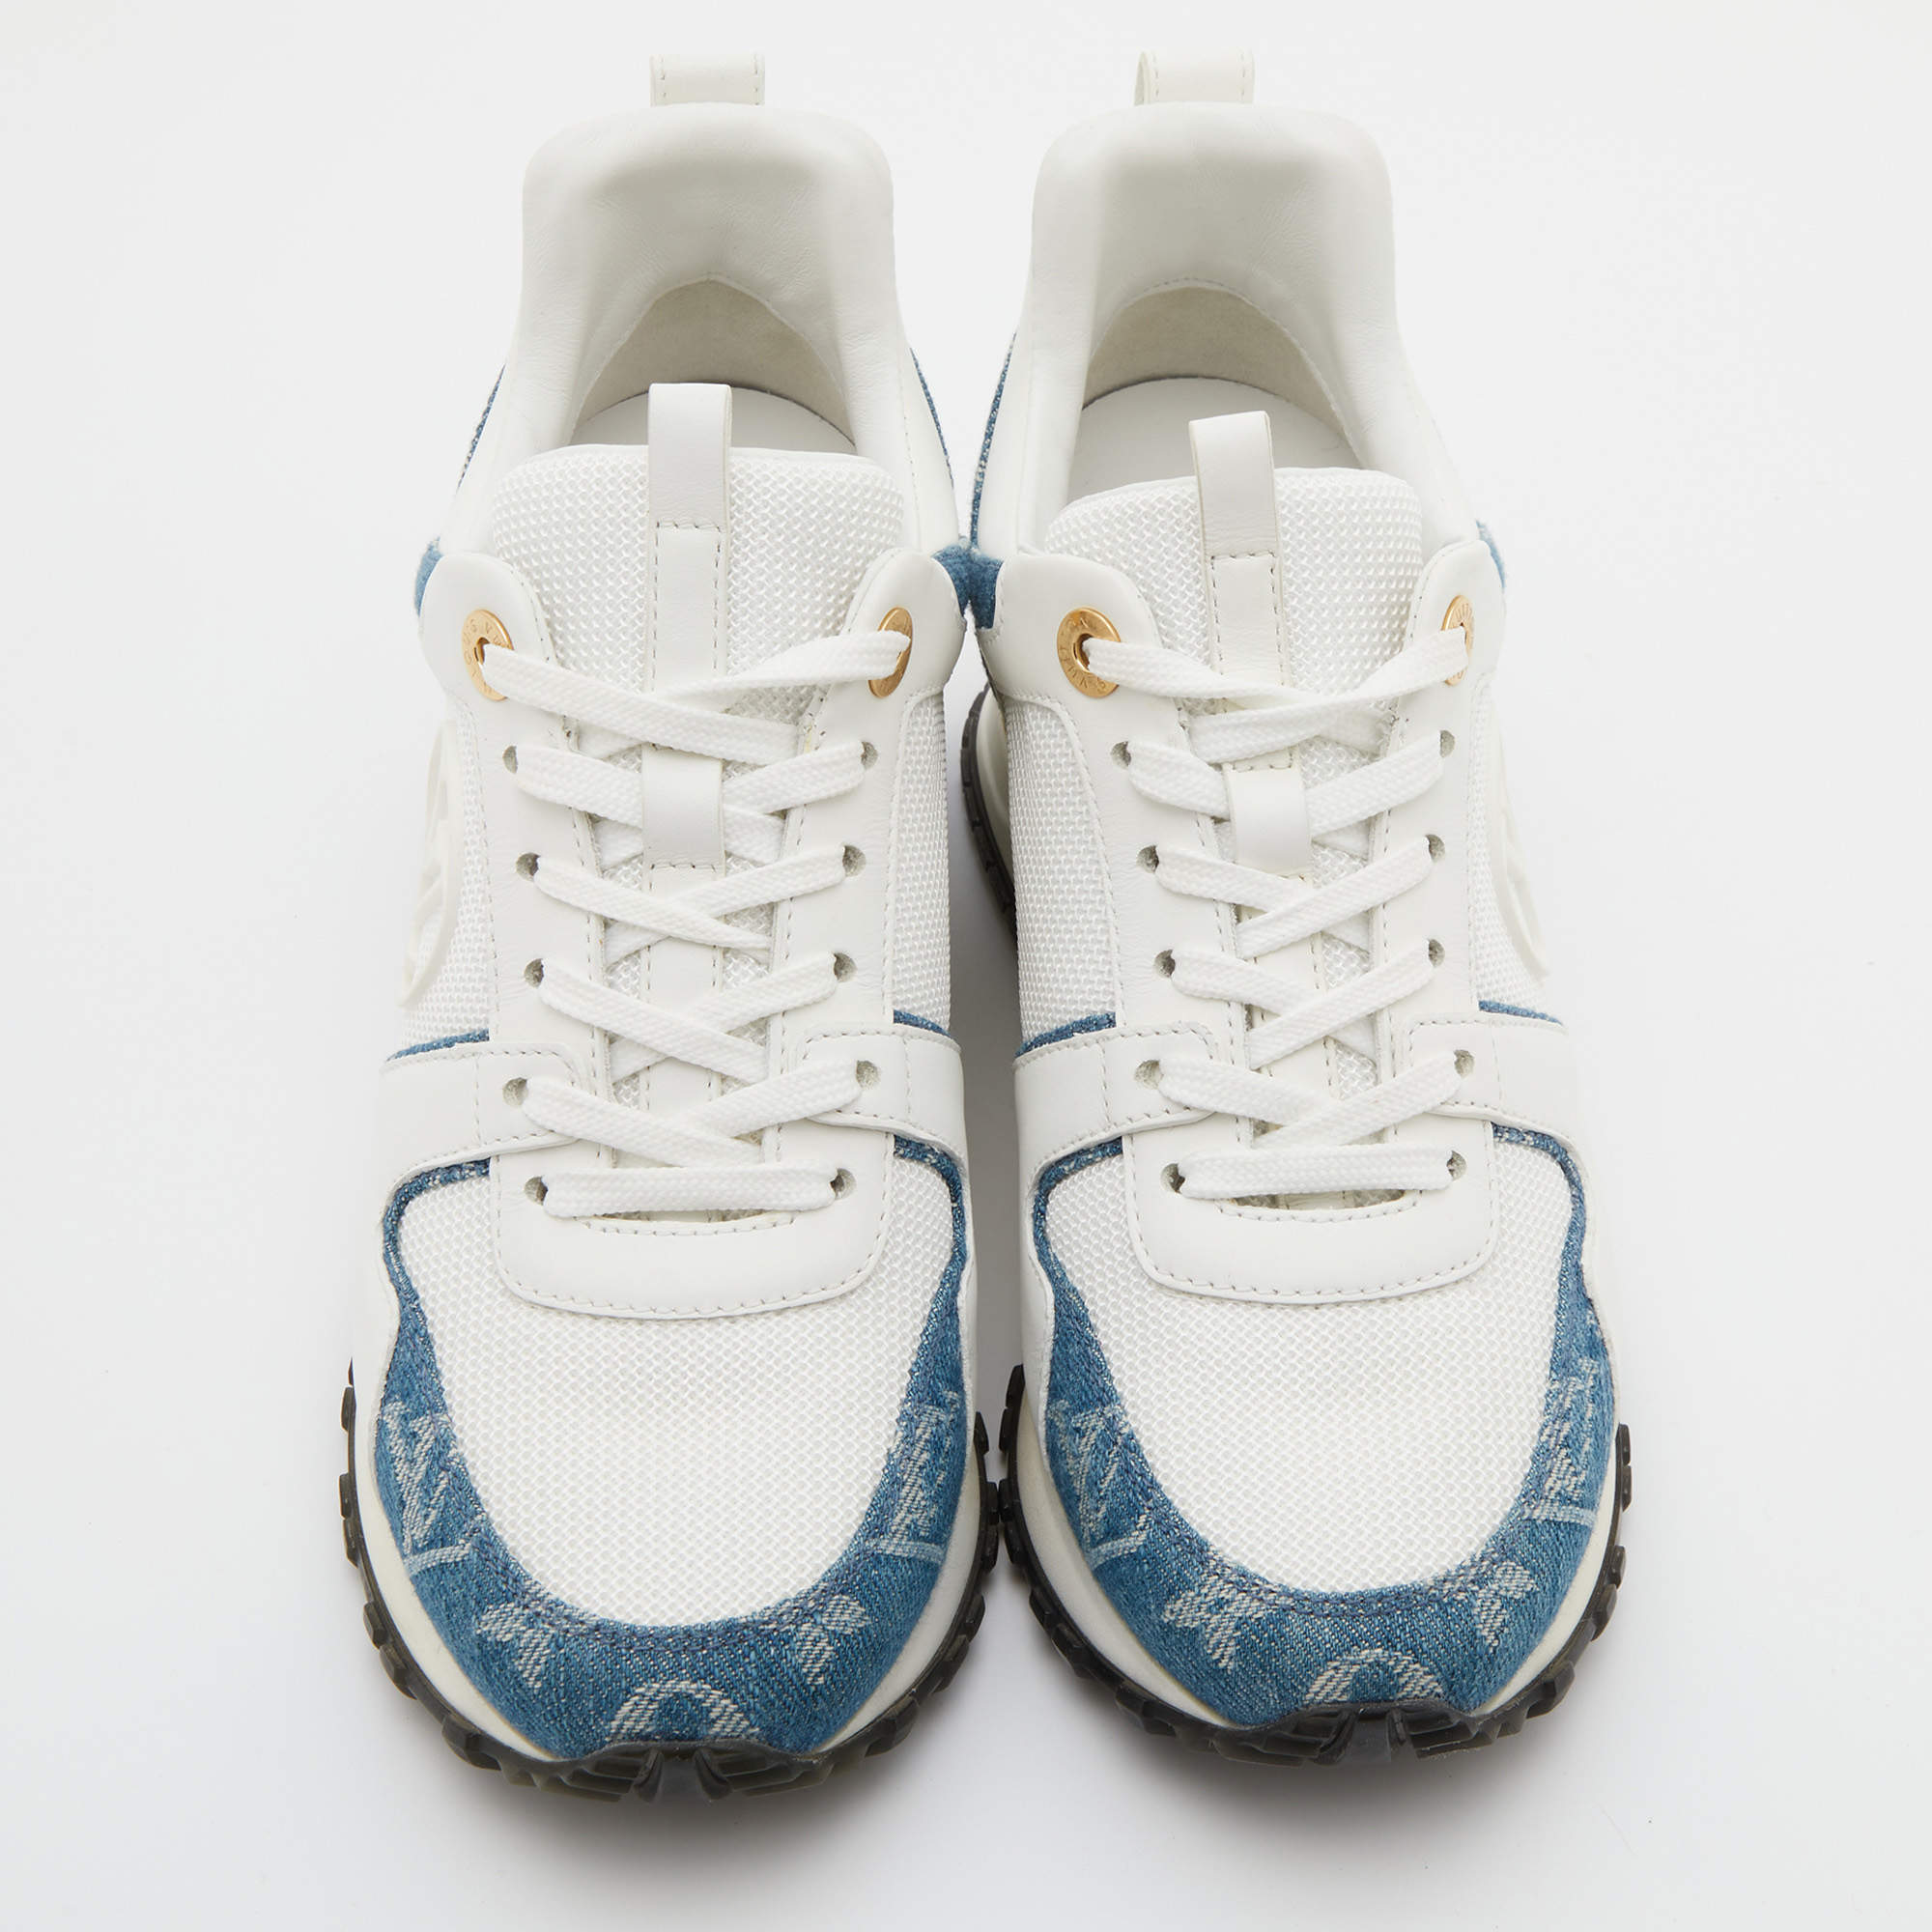 Louis Vuitton Blue Denim And Leather Run Away Sneakers Size 36 at